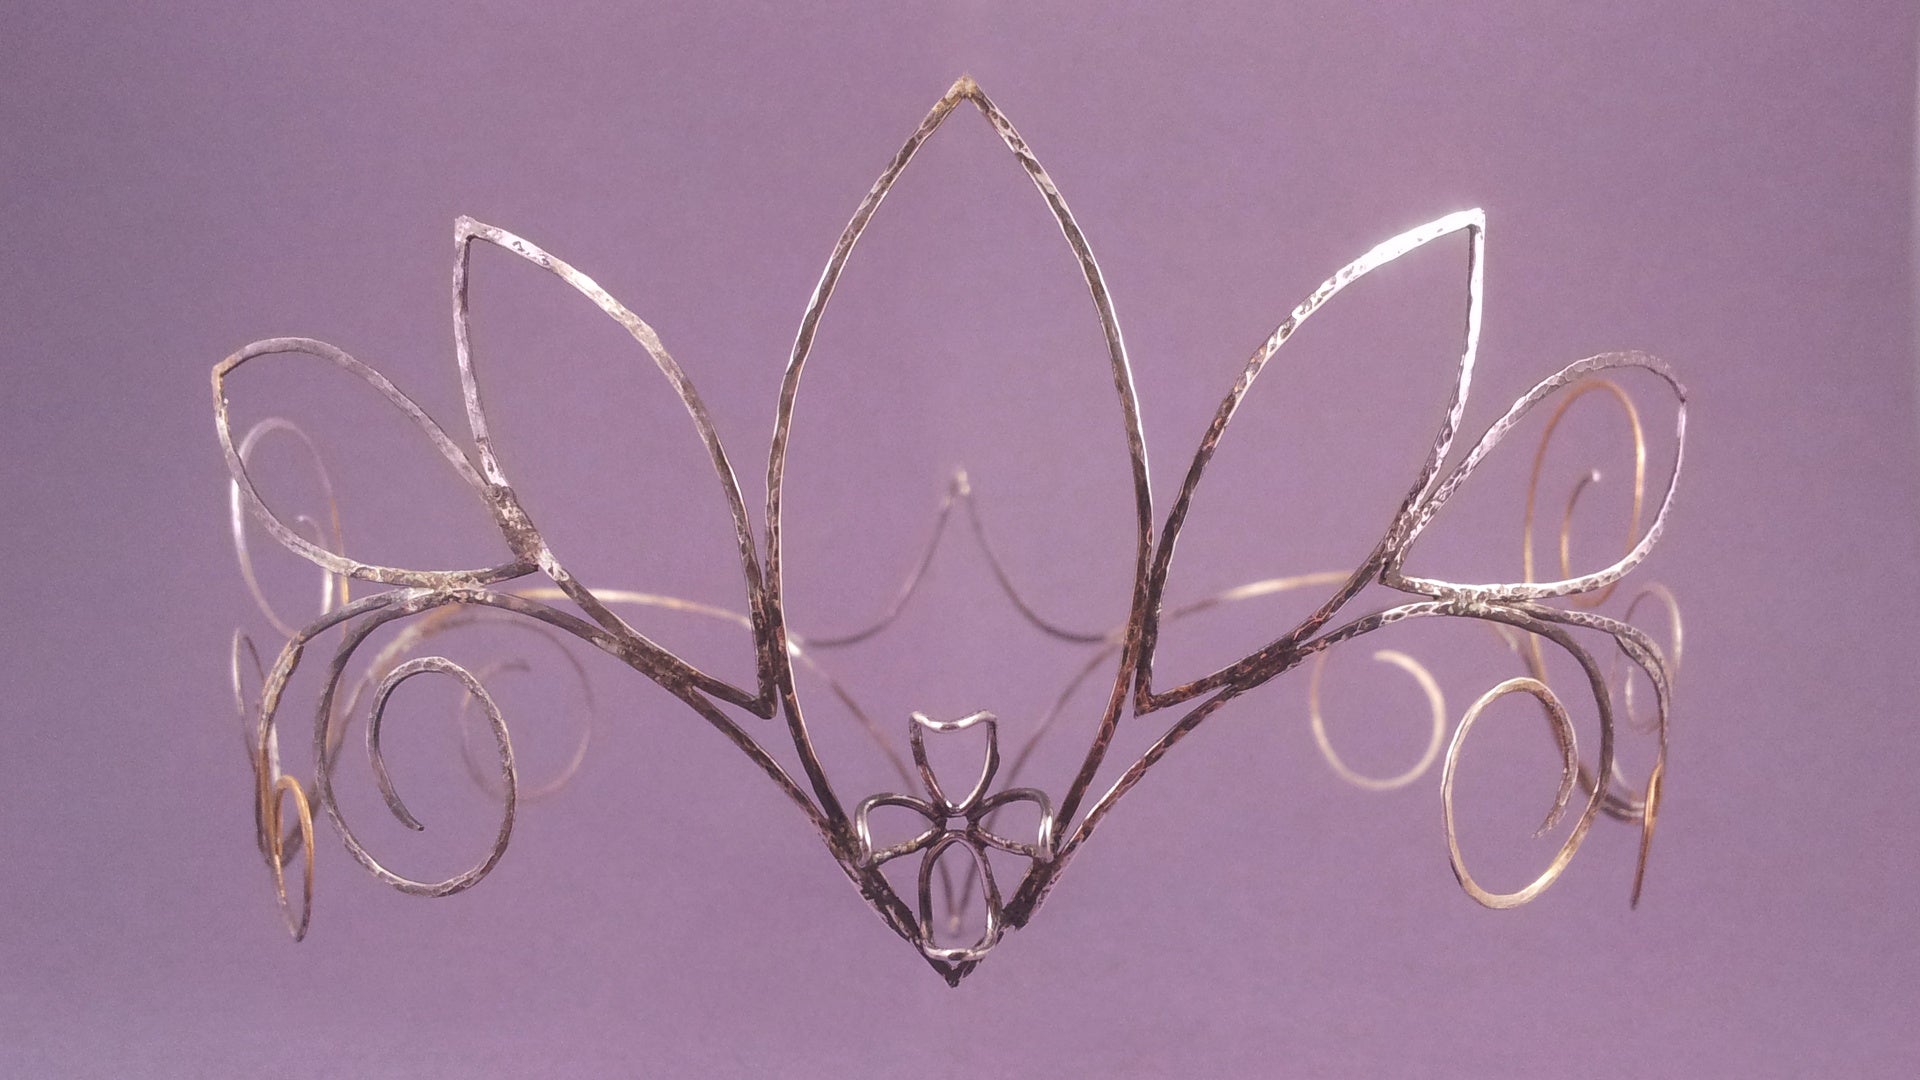 Front view of the ready soldered tiara